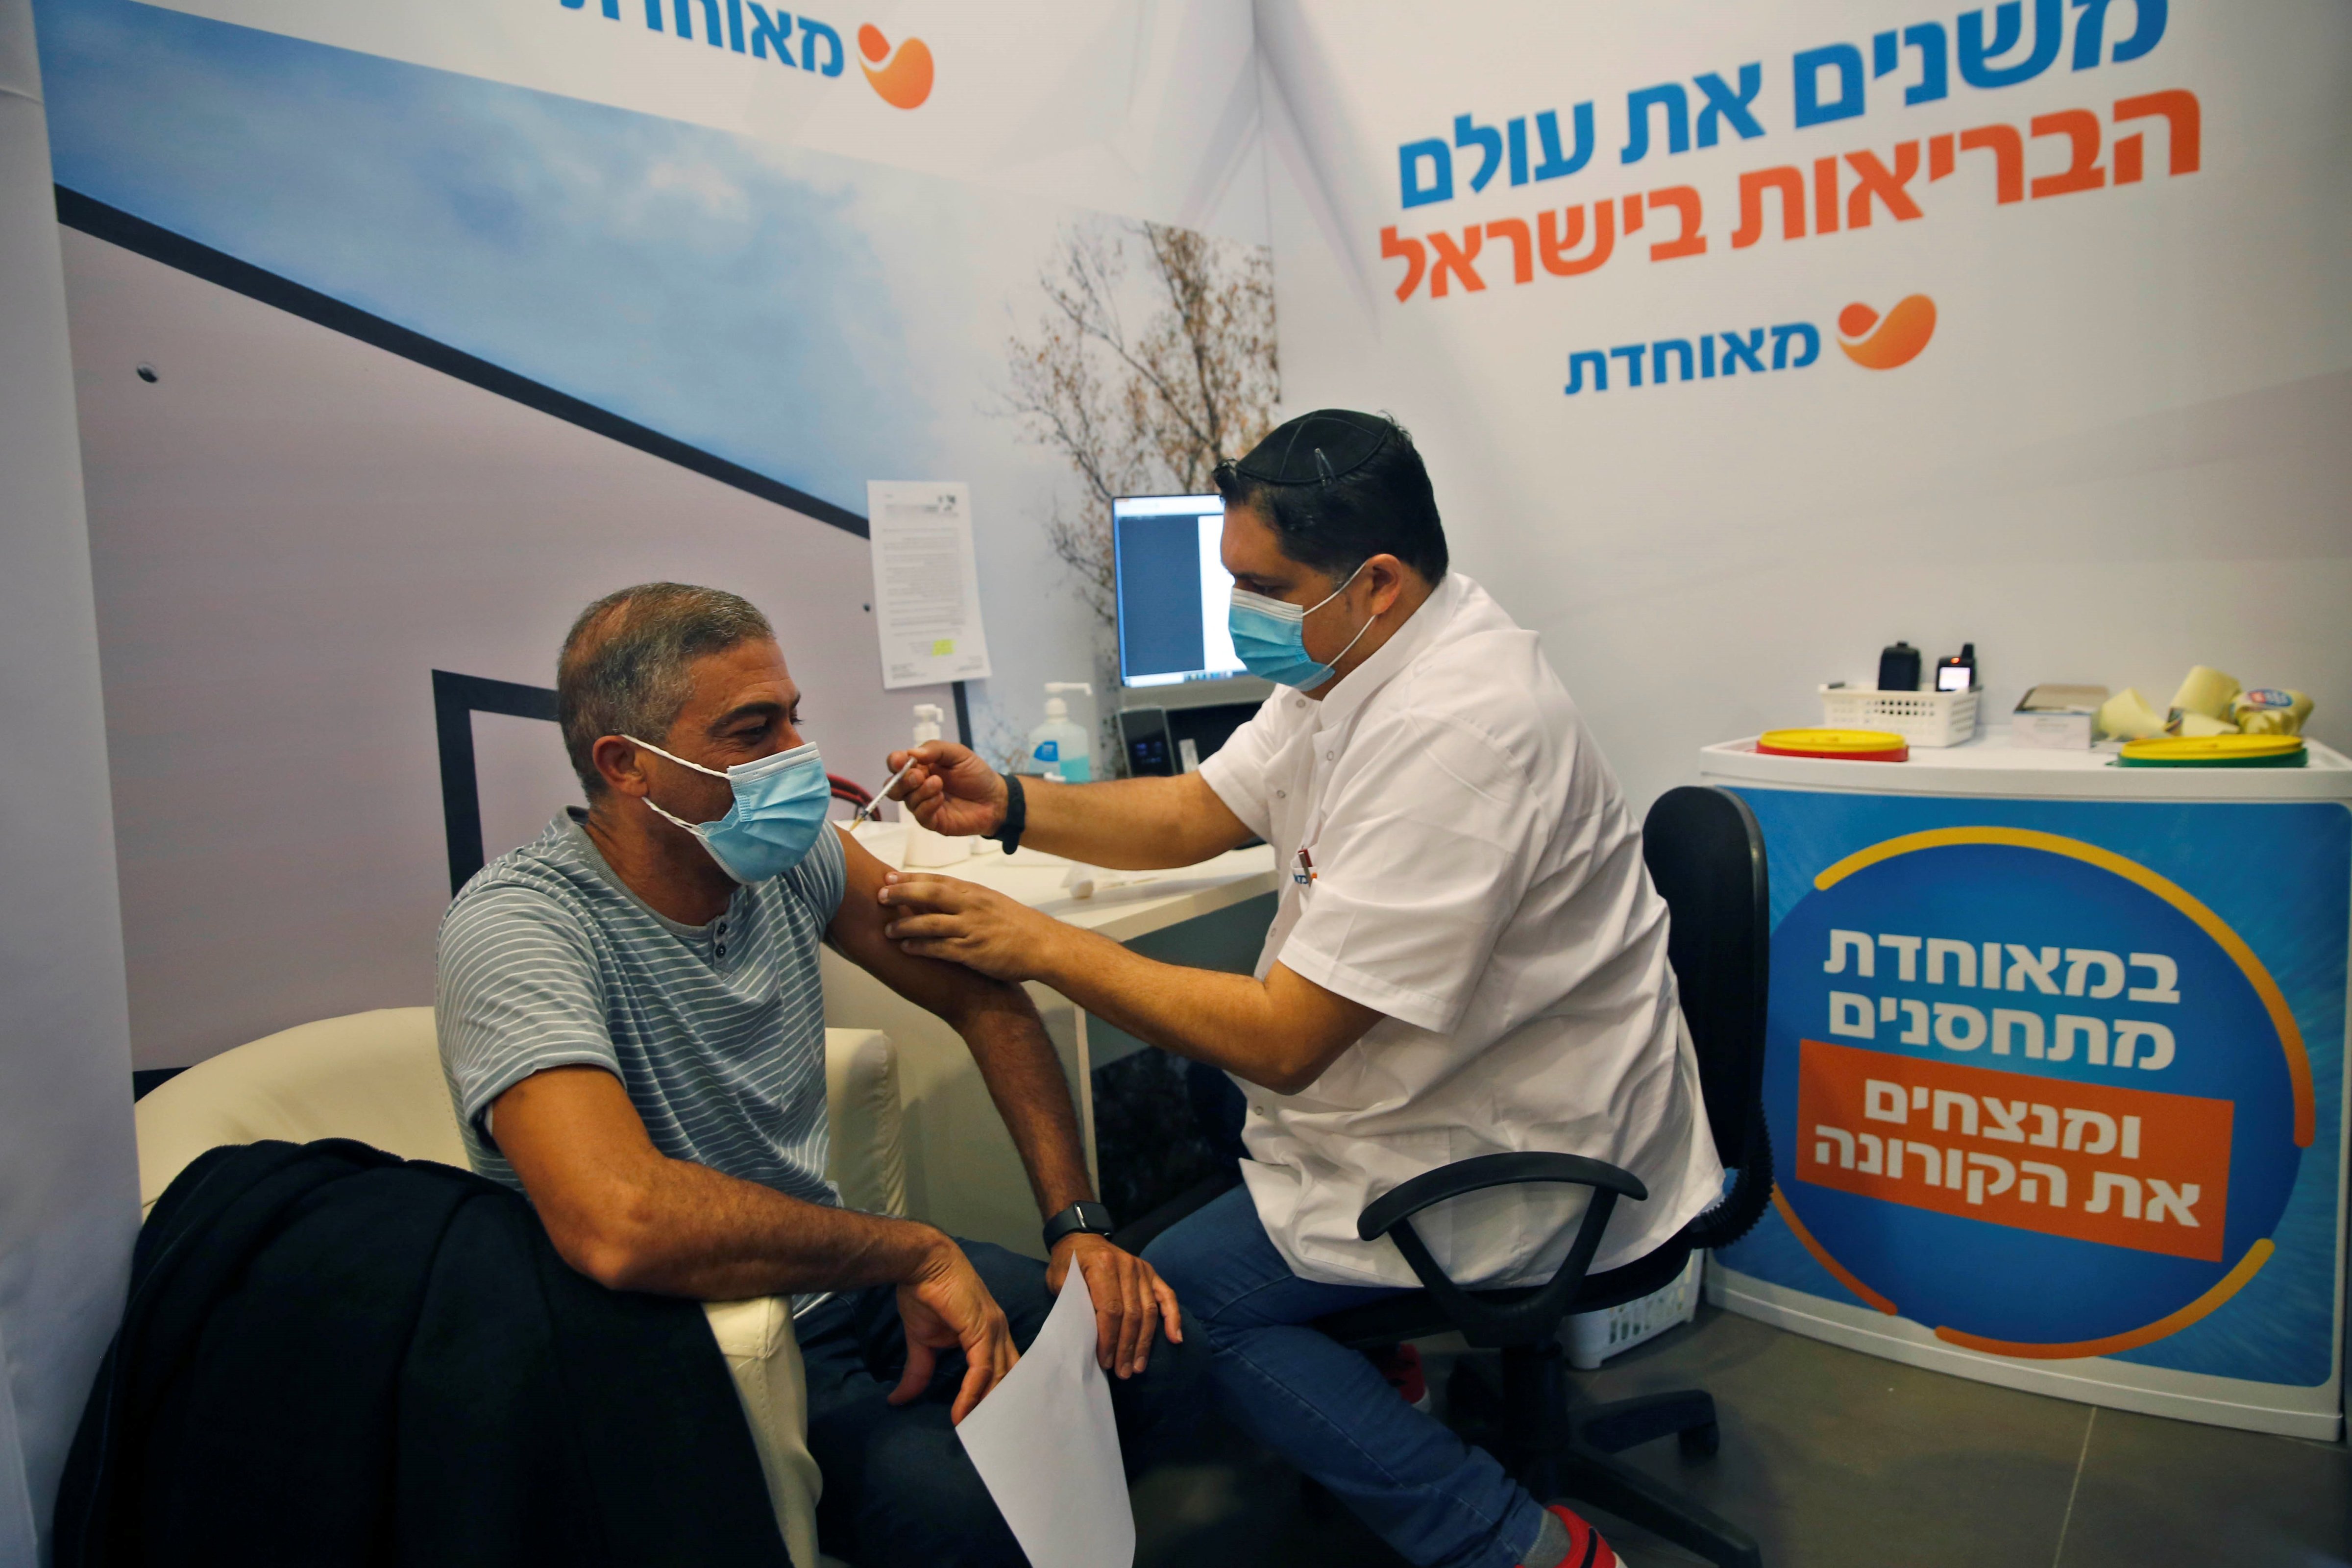 A man receives a COVID-19 vaccine at a health services center in Rehovot, central Israel, on Jan. 14, 2021. (Gil Cohen Magen—Xinhua News Agency/Getty Images)